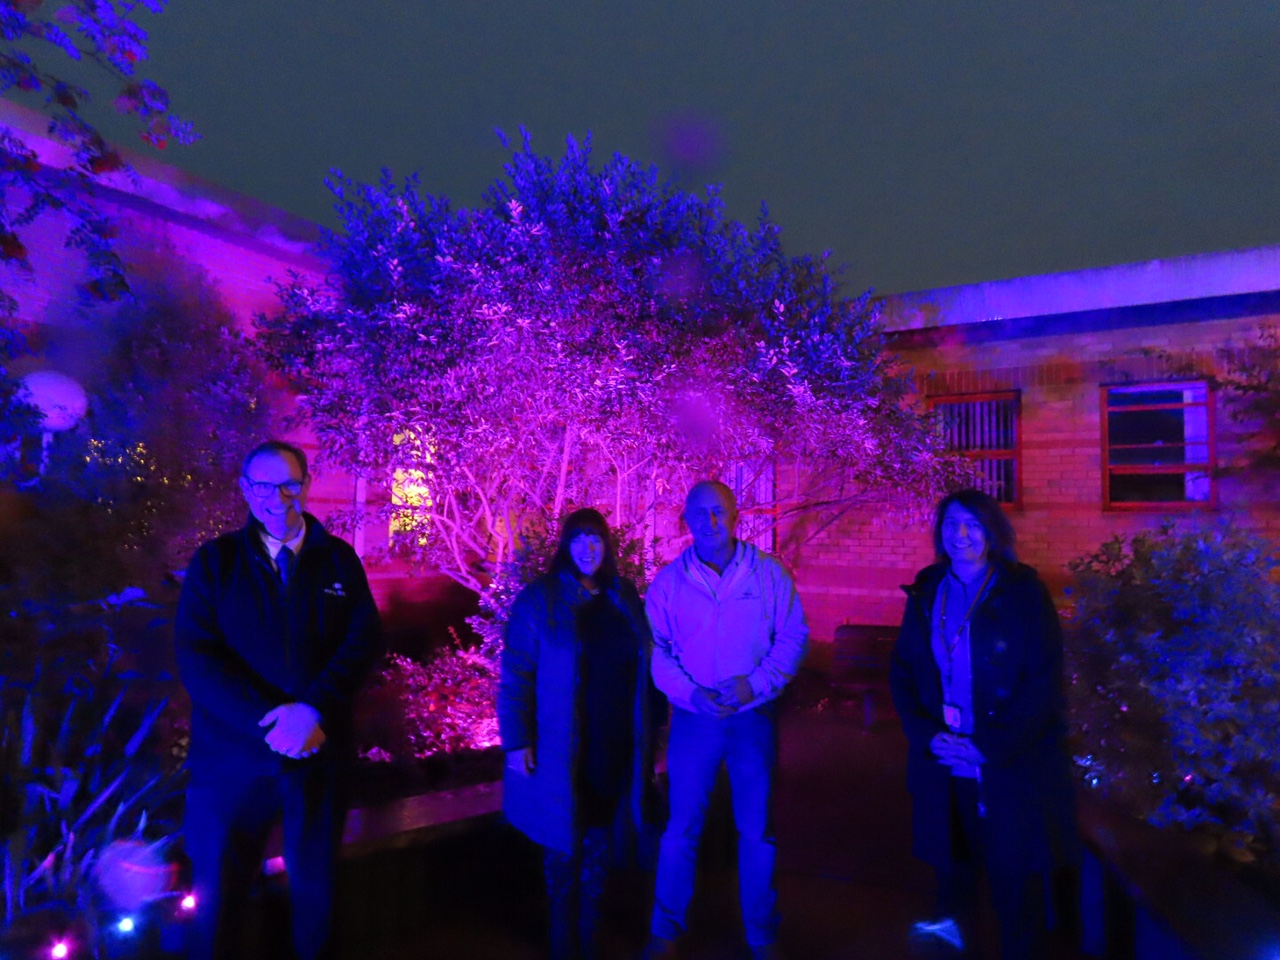 New lights have been installed in the baby gardens at Southport Hospital and Ormskirk Hospital by IllumiDex UK Ltd. Southport & OrmskirkHospital NHS Trust Chaplain Martin Abrams (left) and chaplaincy and spiritual care colleague Jan Fraser (right) with IllumiDex Directors Steve amd Jan Clayton (centre). Photo by Andrew Brown Media